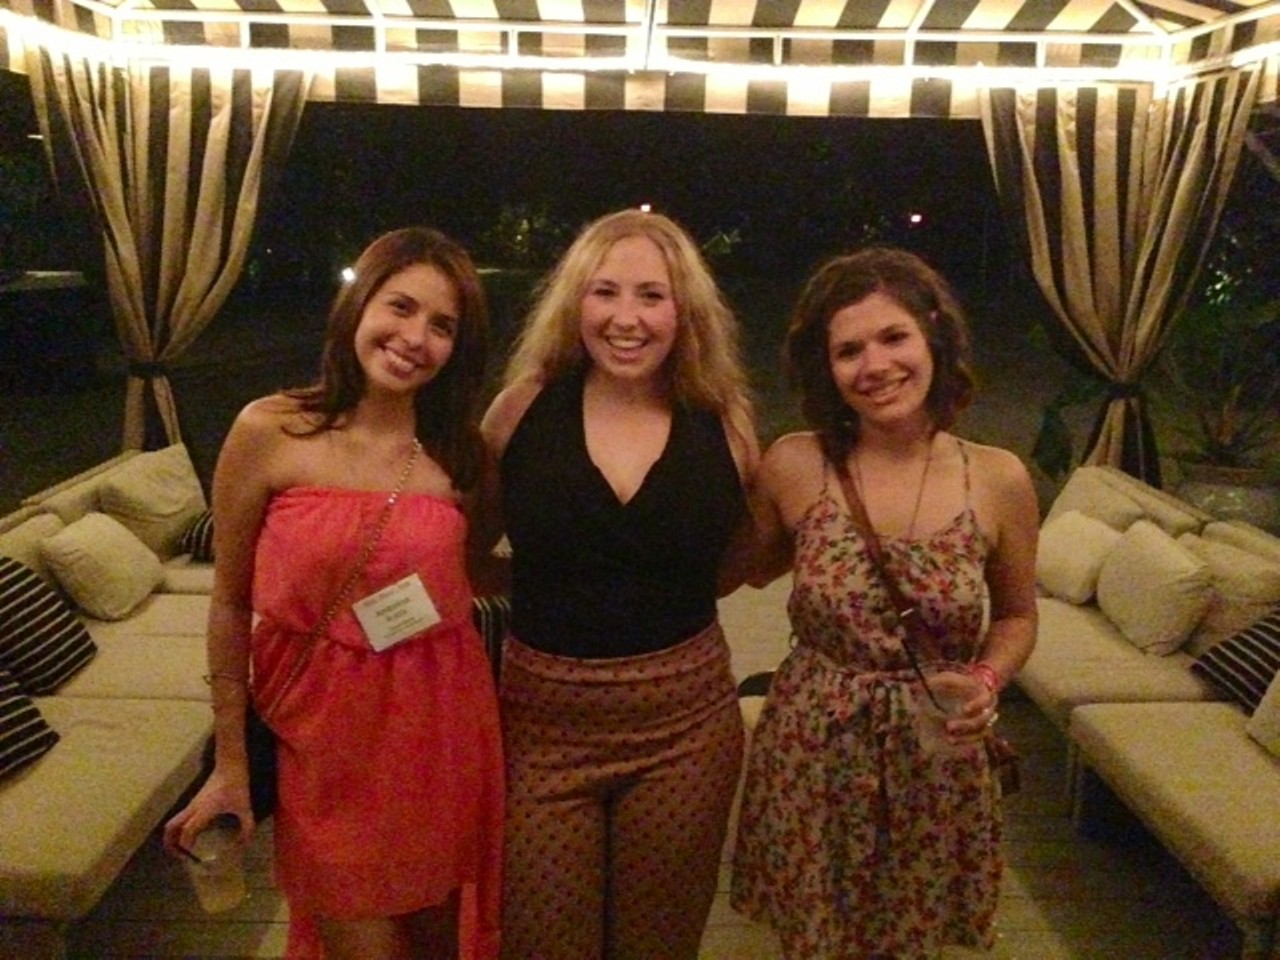 The lovely ladies of OW, Andreina Icaza, Shelby Sloan and Jerrica Schwartz, on the scene in South Beach